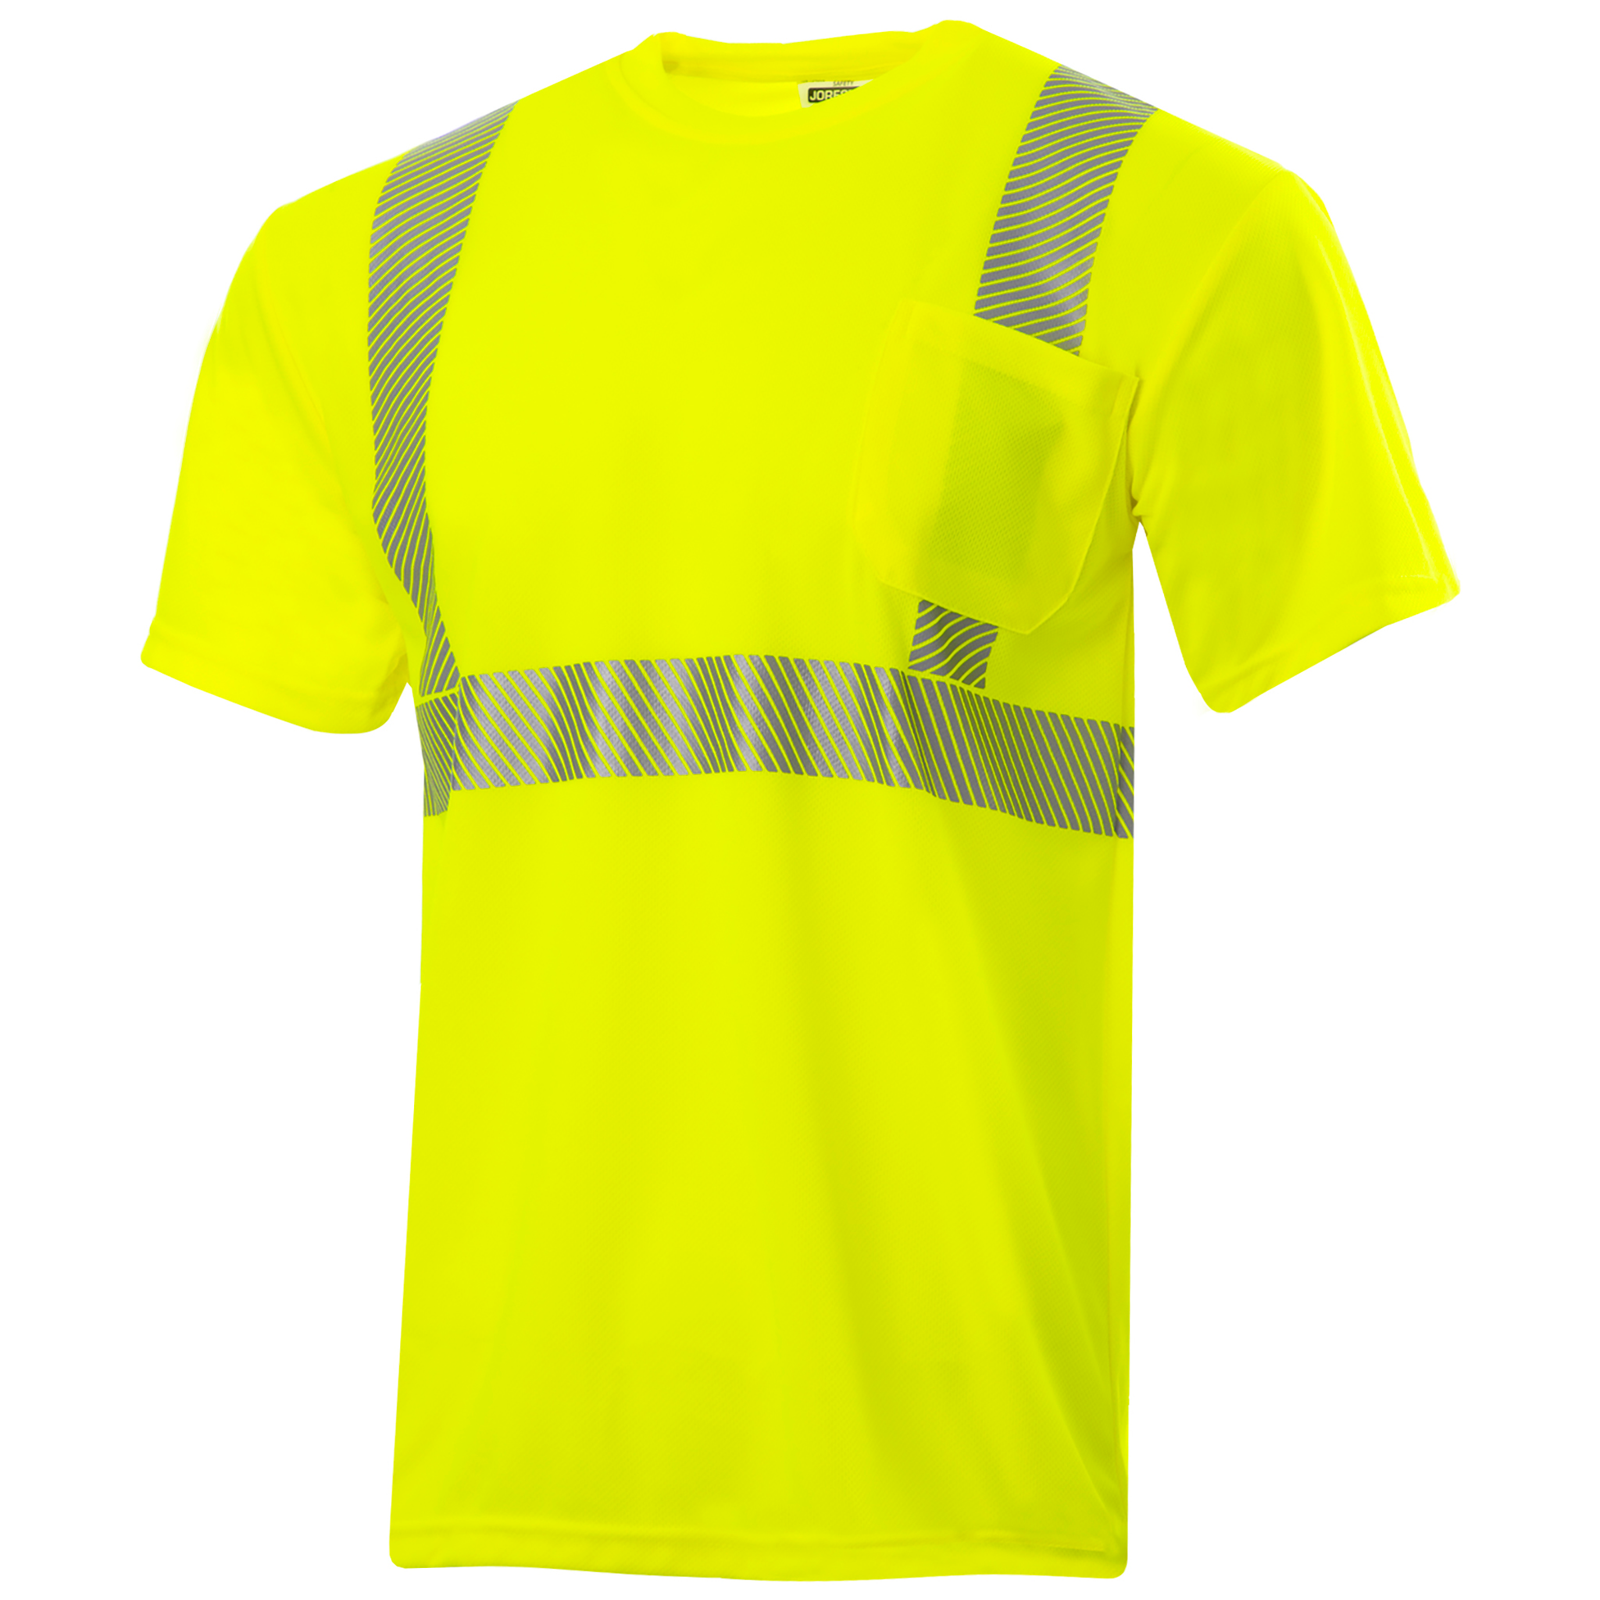 Hi-Vis Lime/Yellow heat transfer reflective safety pocket shirt with breathable birds eye polyester fabric